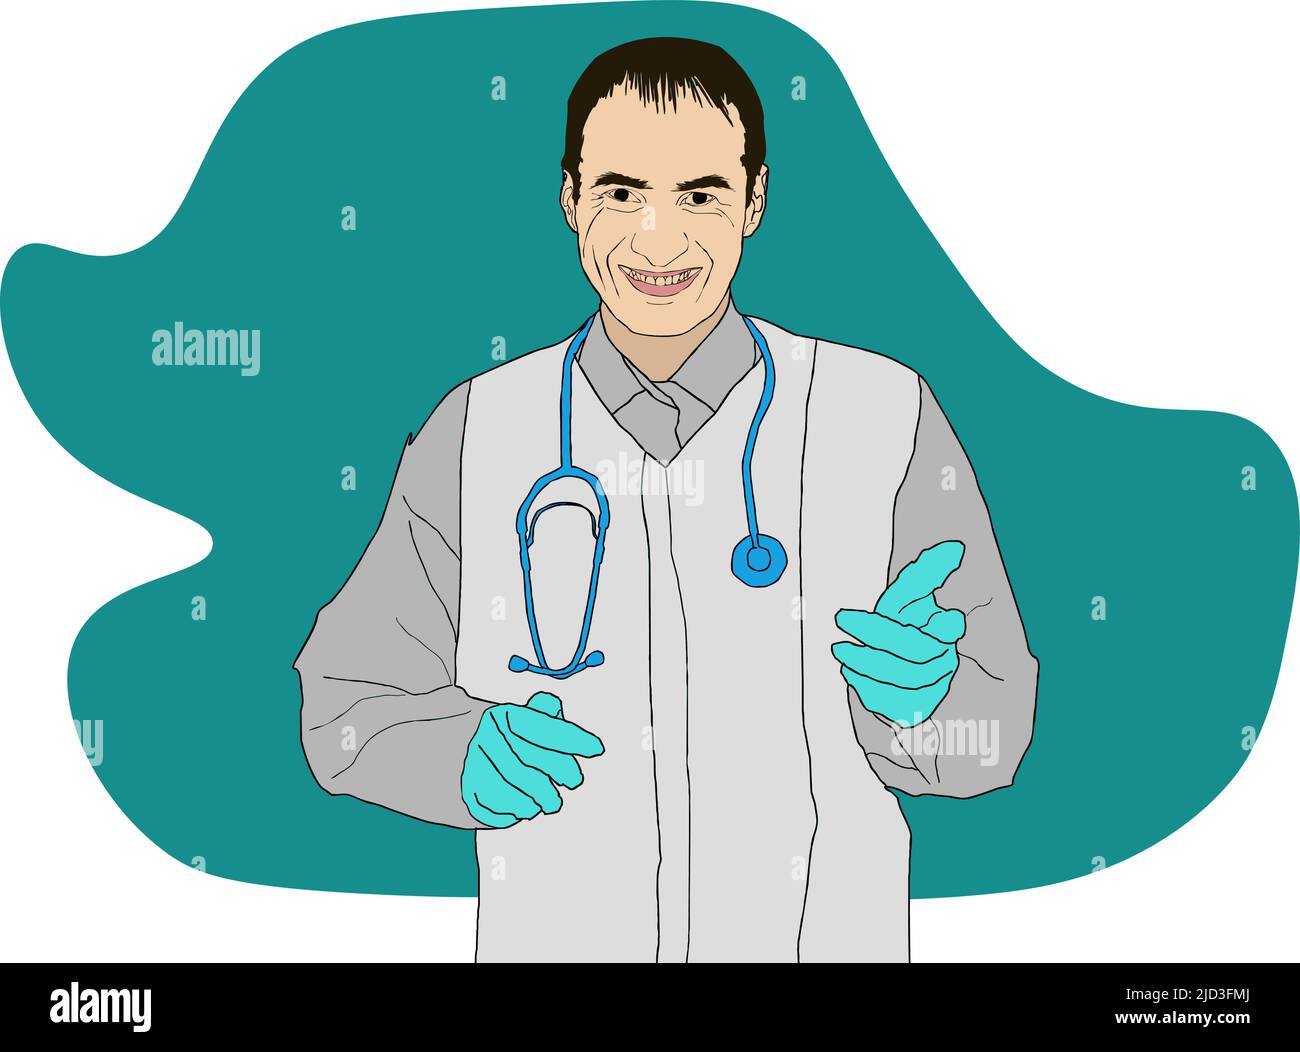 Vector medical icon doctor. Image Doctor with stethoscope. Illustration Medic doctor avatar in a flat style. Stock Vector